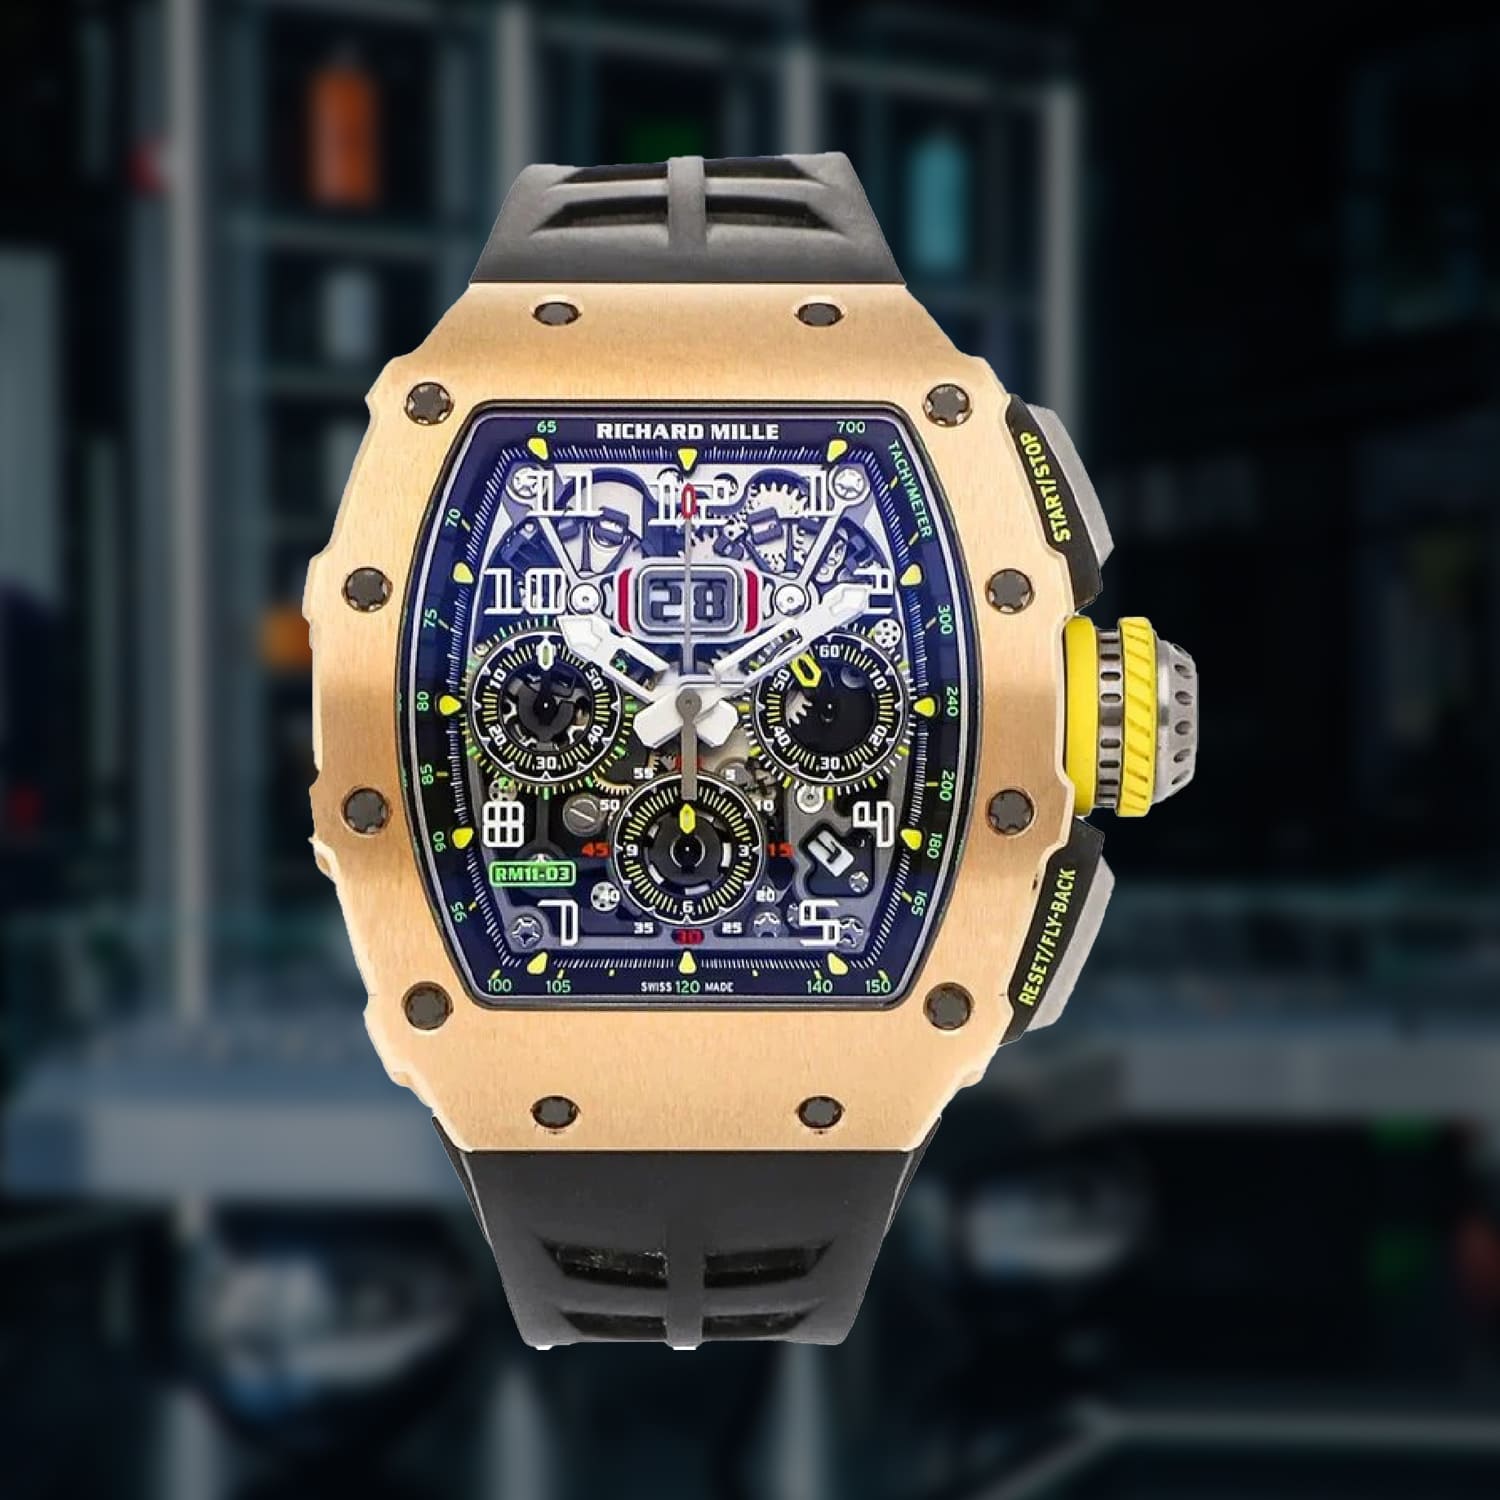 Richard Mille RM11-03 Rose Gold, Titanium | The Watch Meister